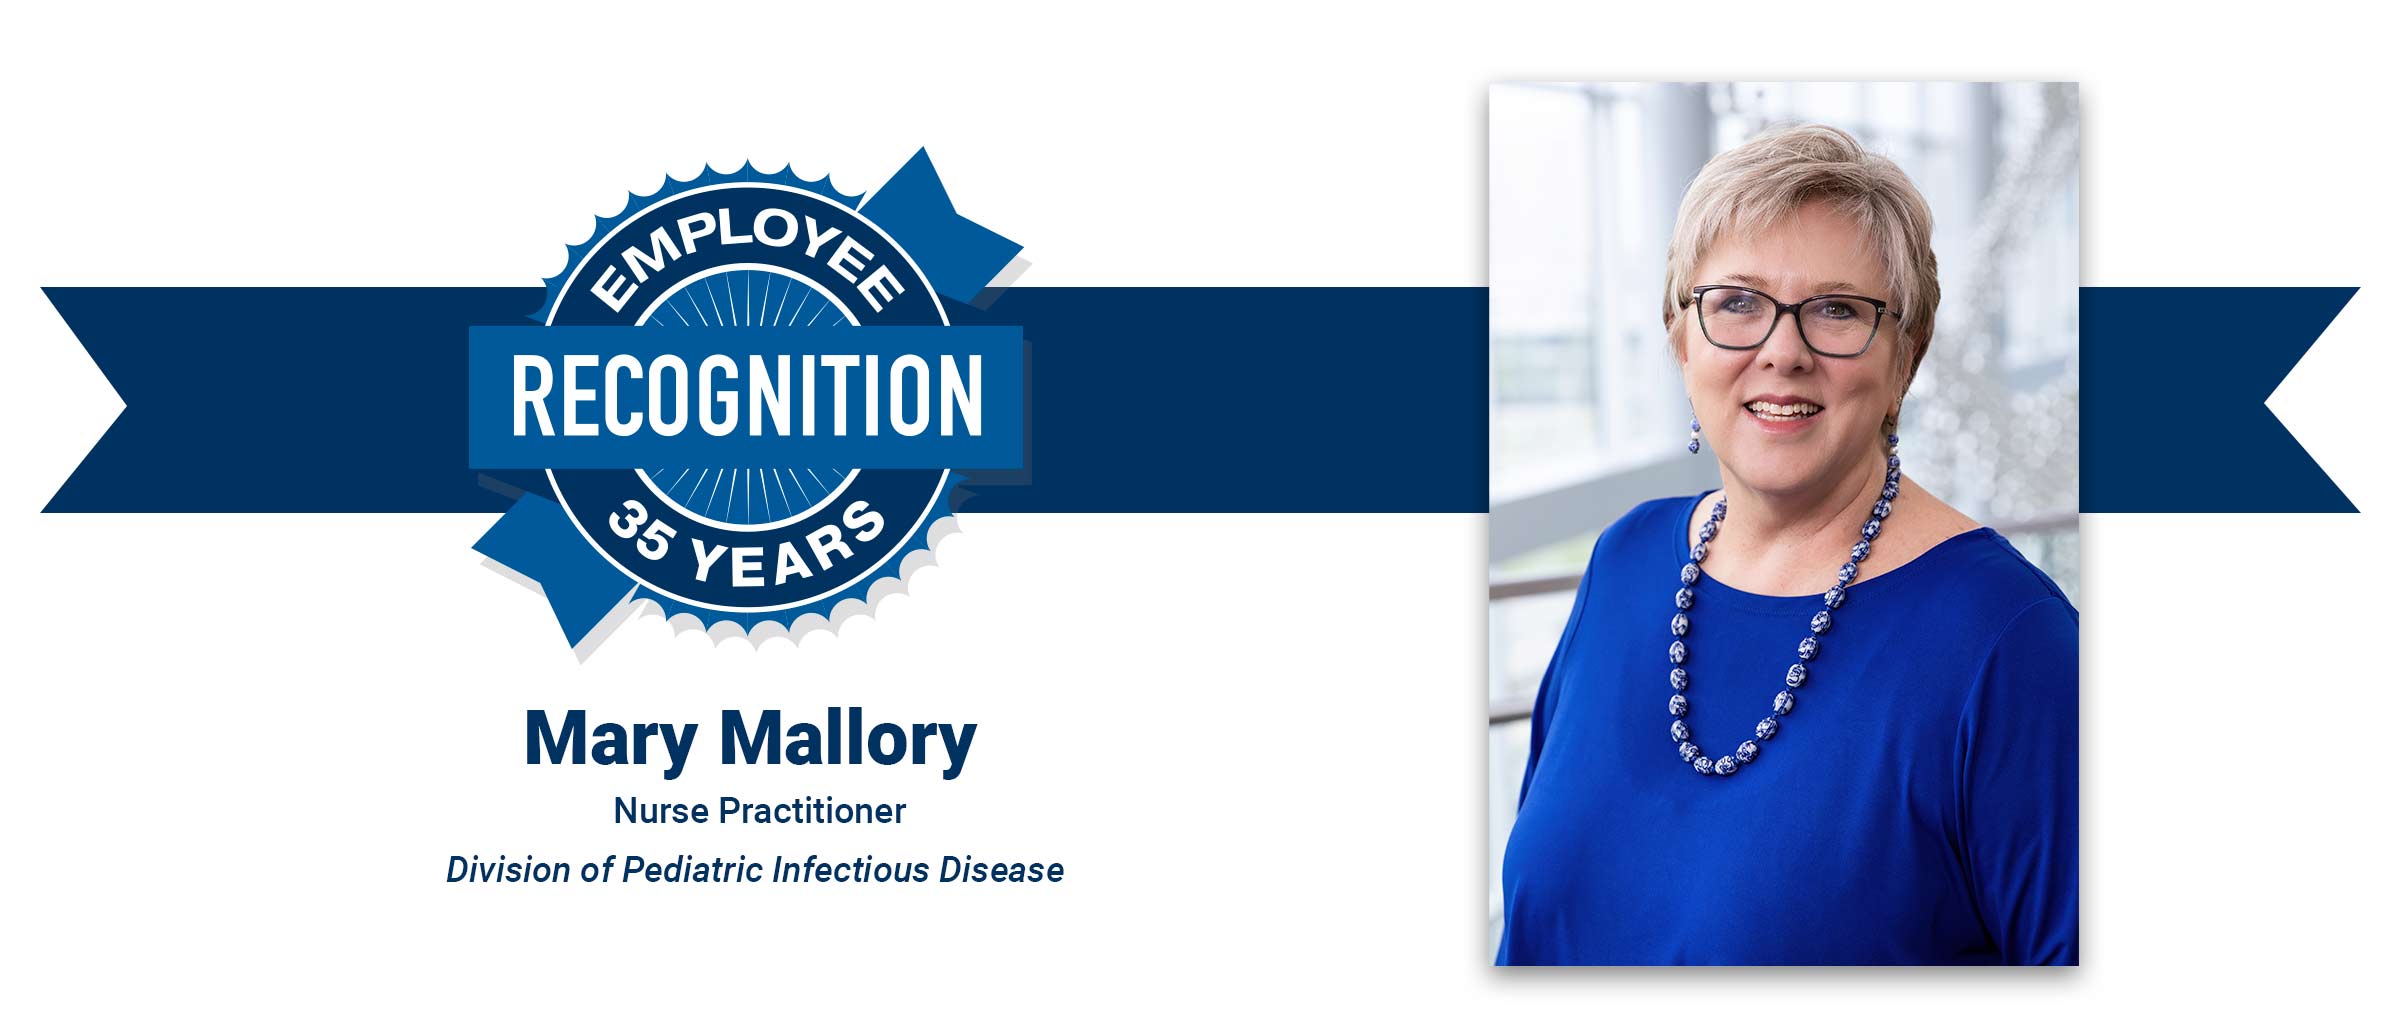 Woman with white hair, glasses, wearing beaded necklace and blue top. Mary Mallory, 35 years employee recognition